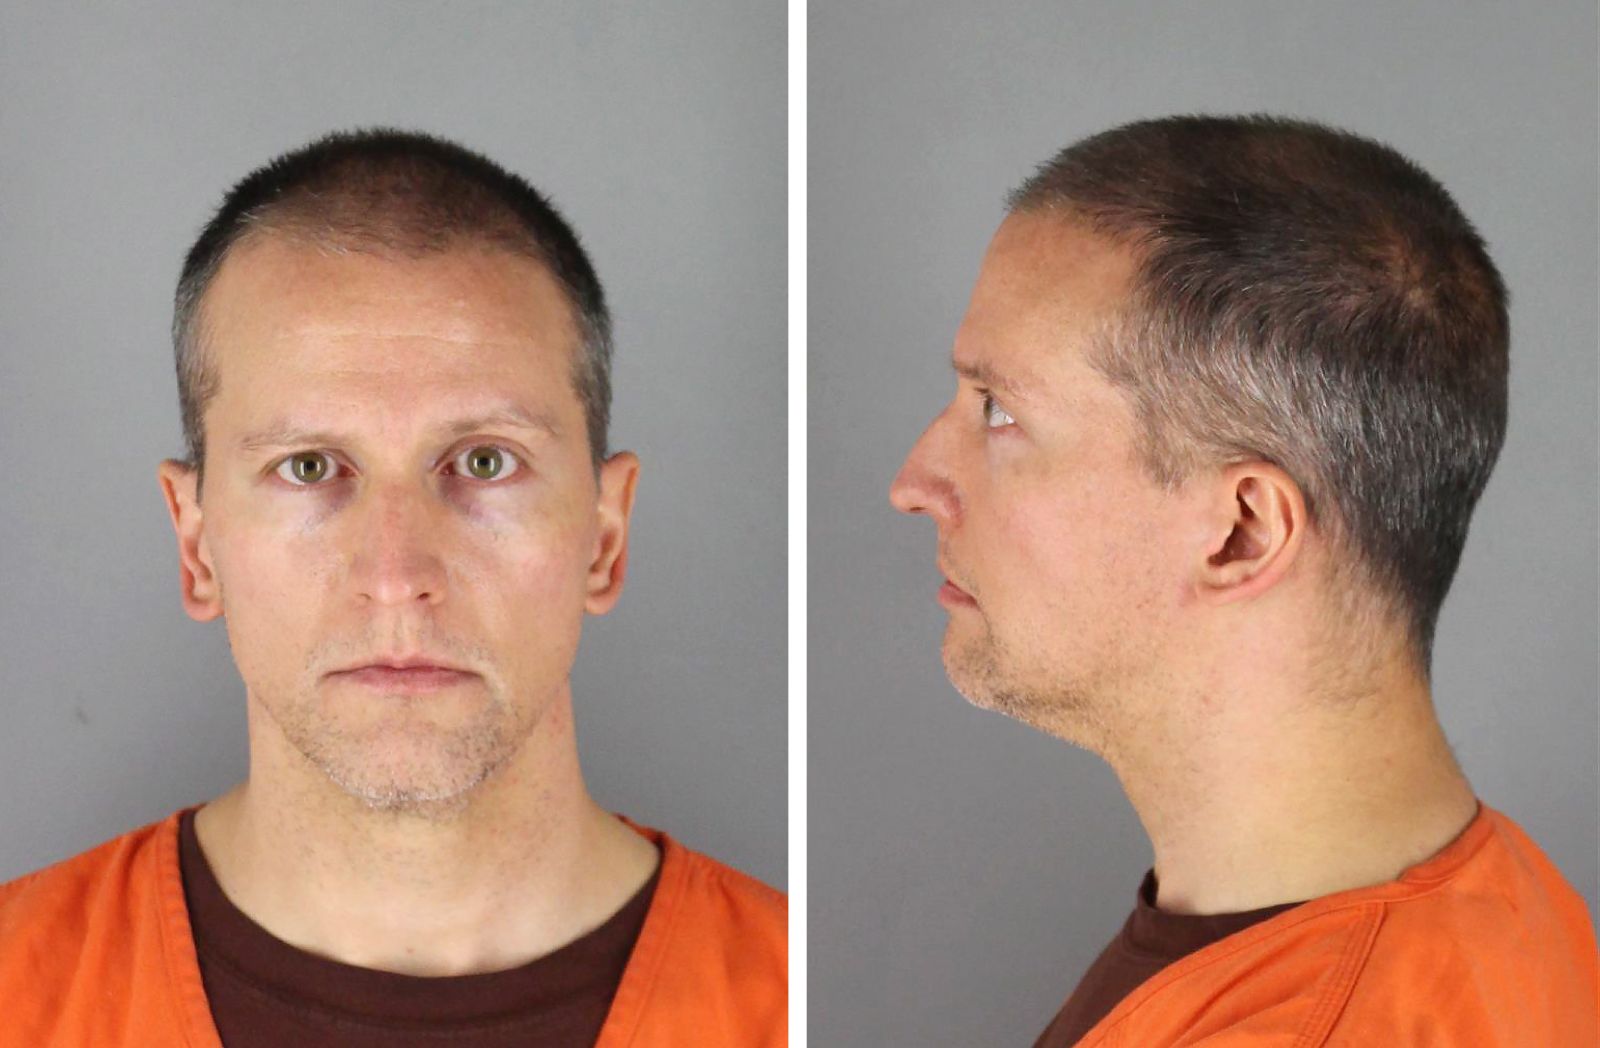 epa09148383 Handout booking photo released by the Hennepin County Sheriff's Office showing former Minneapolis Police Department Police Officer Derek Chauvin who was arrested and charged with second-degree murder, third-degree murder and second-degree manslaughter in the death of George Floyd in Minneapolis, Minnesota, USA, 12 June 2020 (reissued 20 April 2021). Former Minneapolis police officer Derek Chauvin was found guilty on all counts in the death of George Floyd on 20 April 2021.  EPA/HENNEPIN COUNTY SHERIFF / HANDOUT  HANDOUT EDITORIAL USE ONLY/NO SALES *** Local Caption *** 56147358